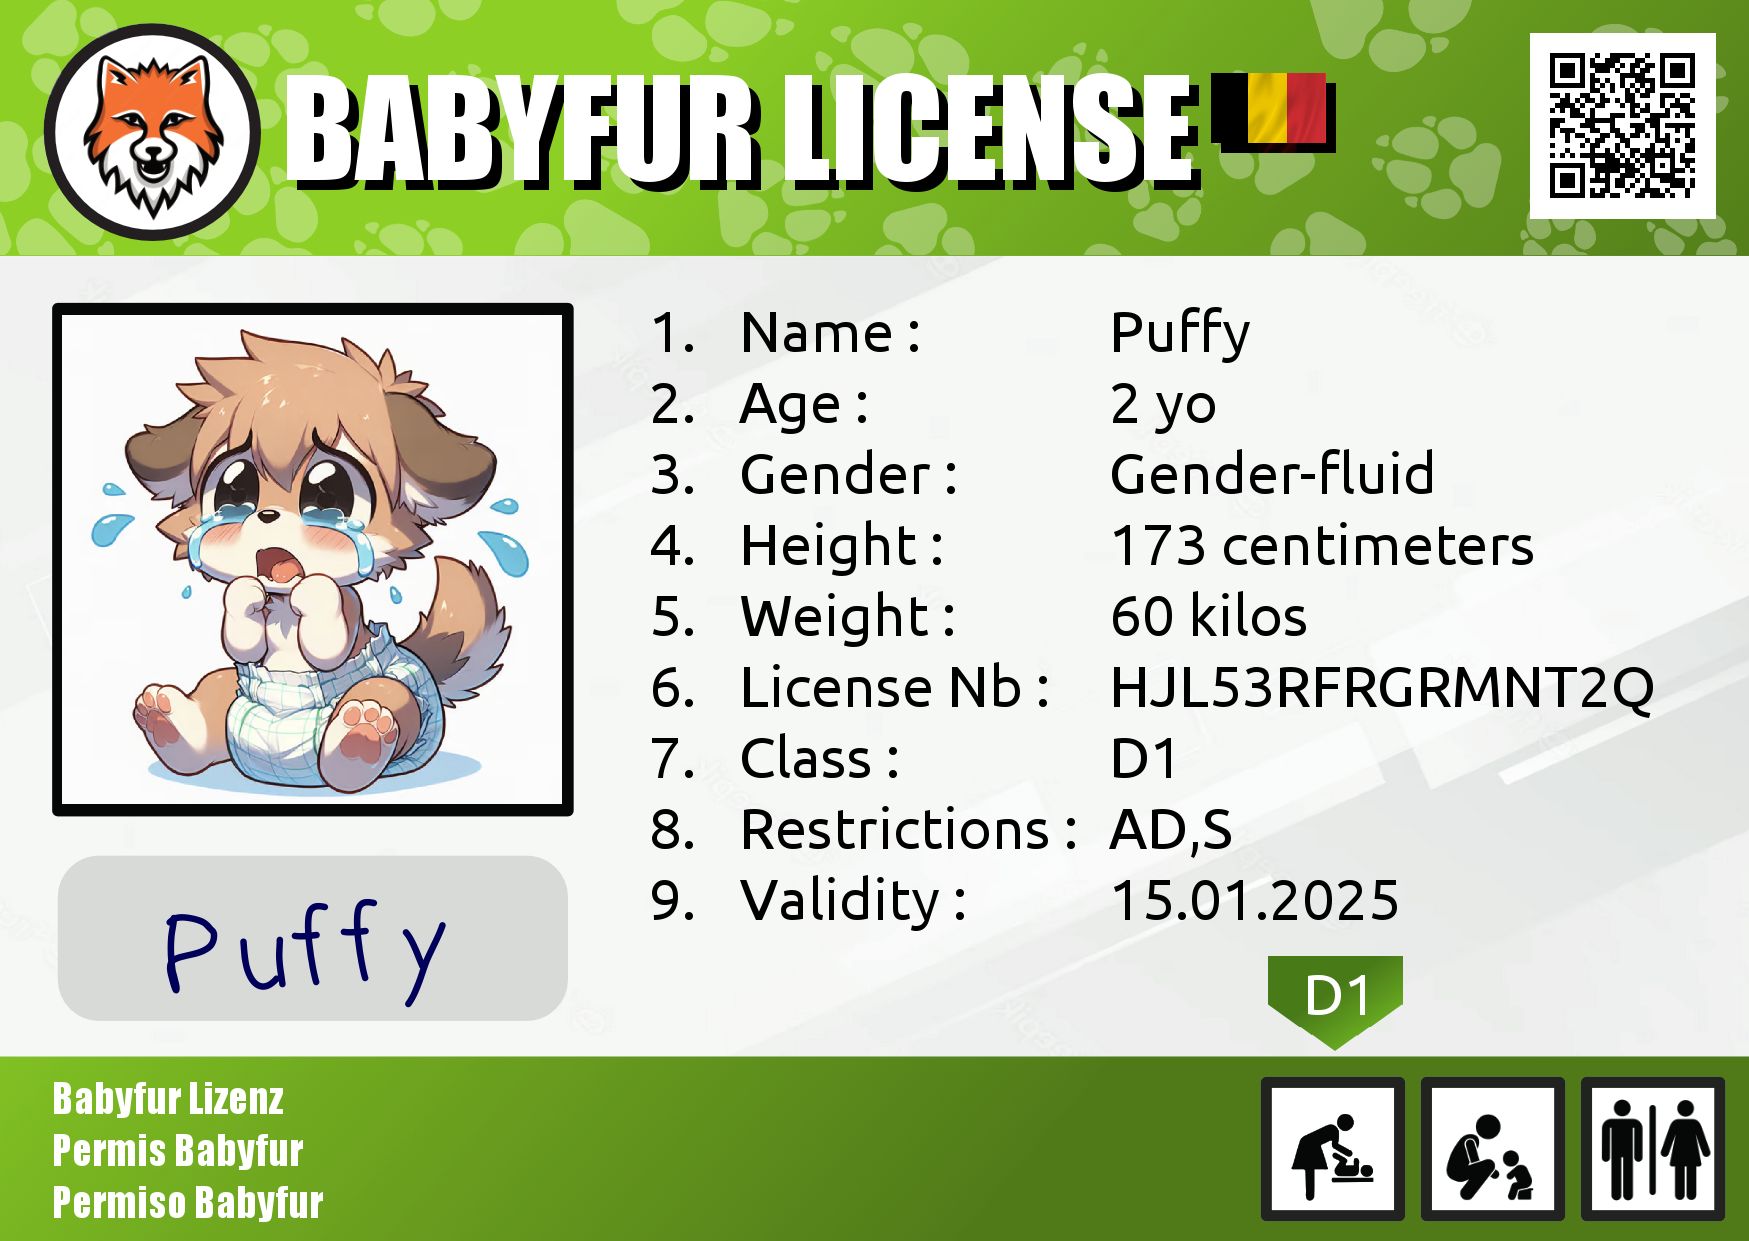 Babyfur License exemple for a furry.